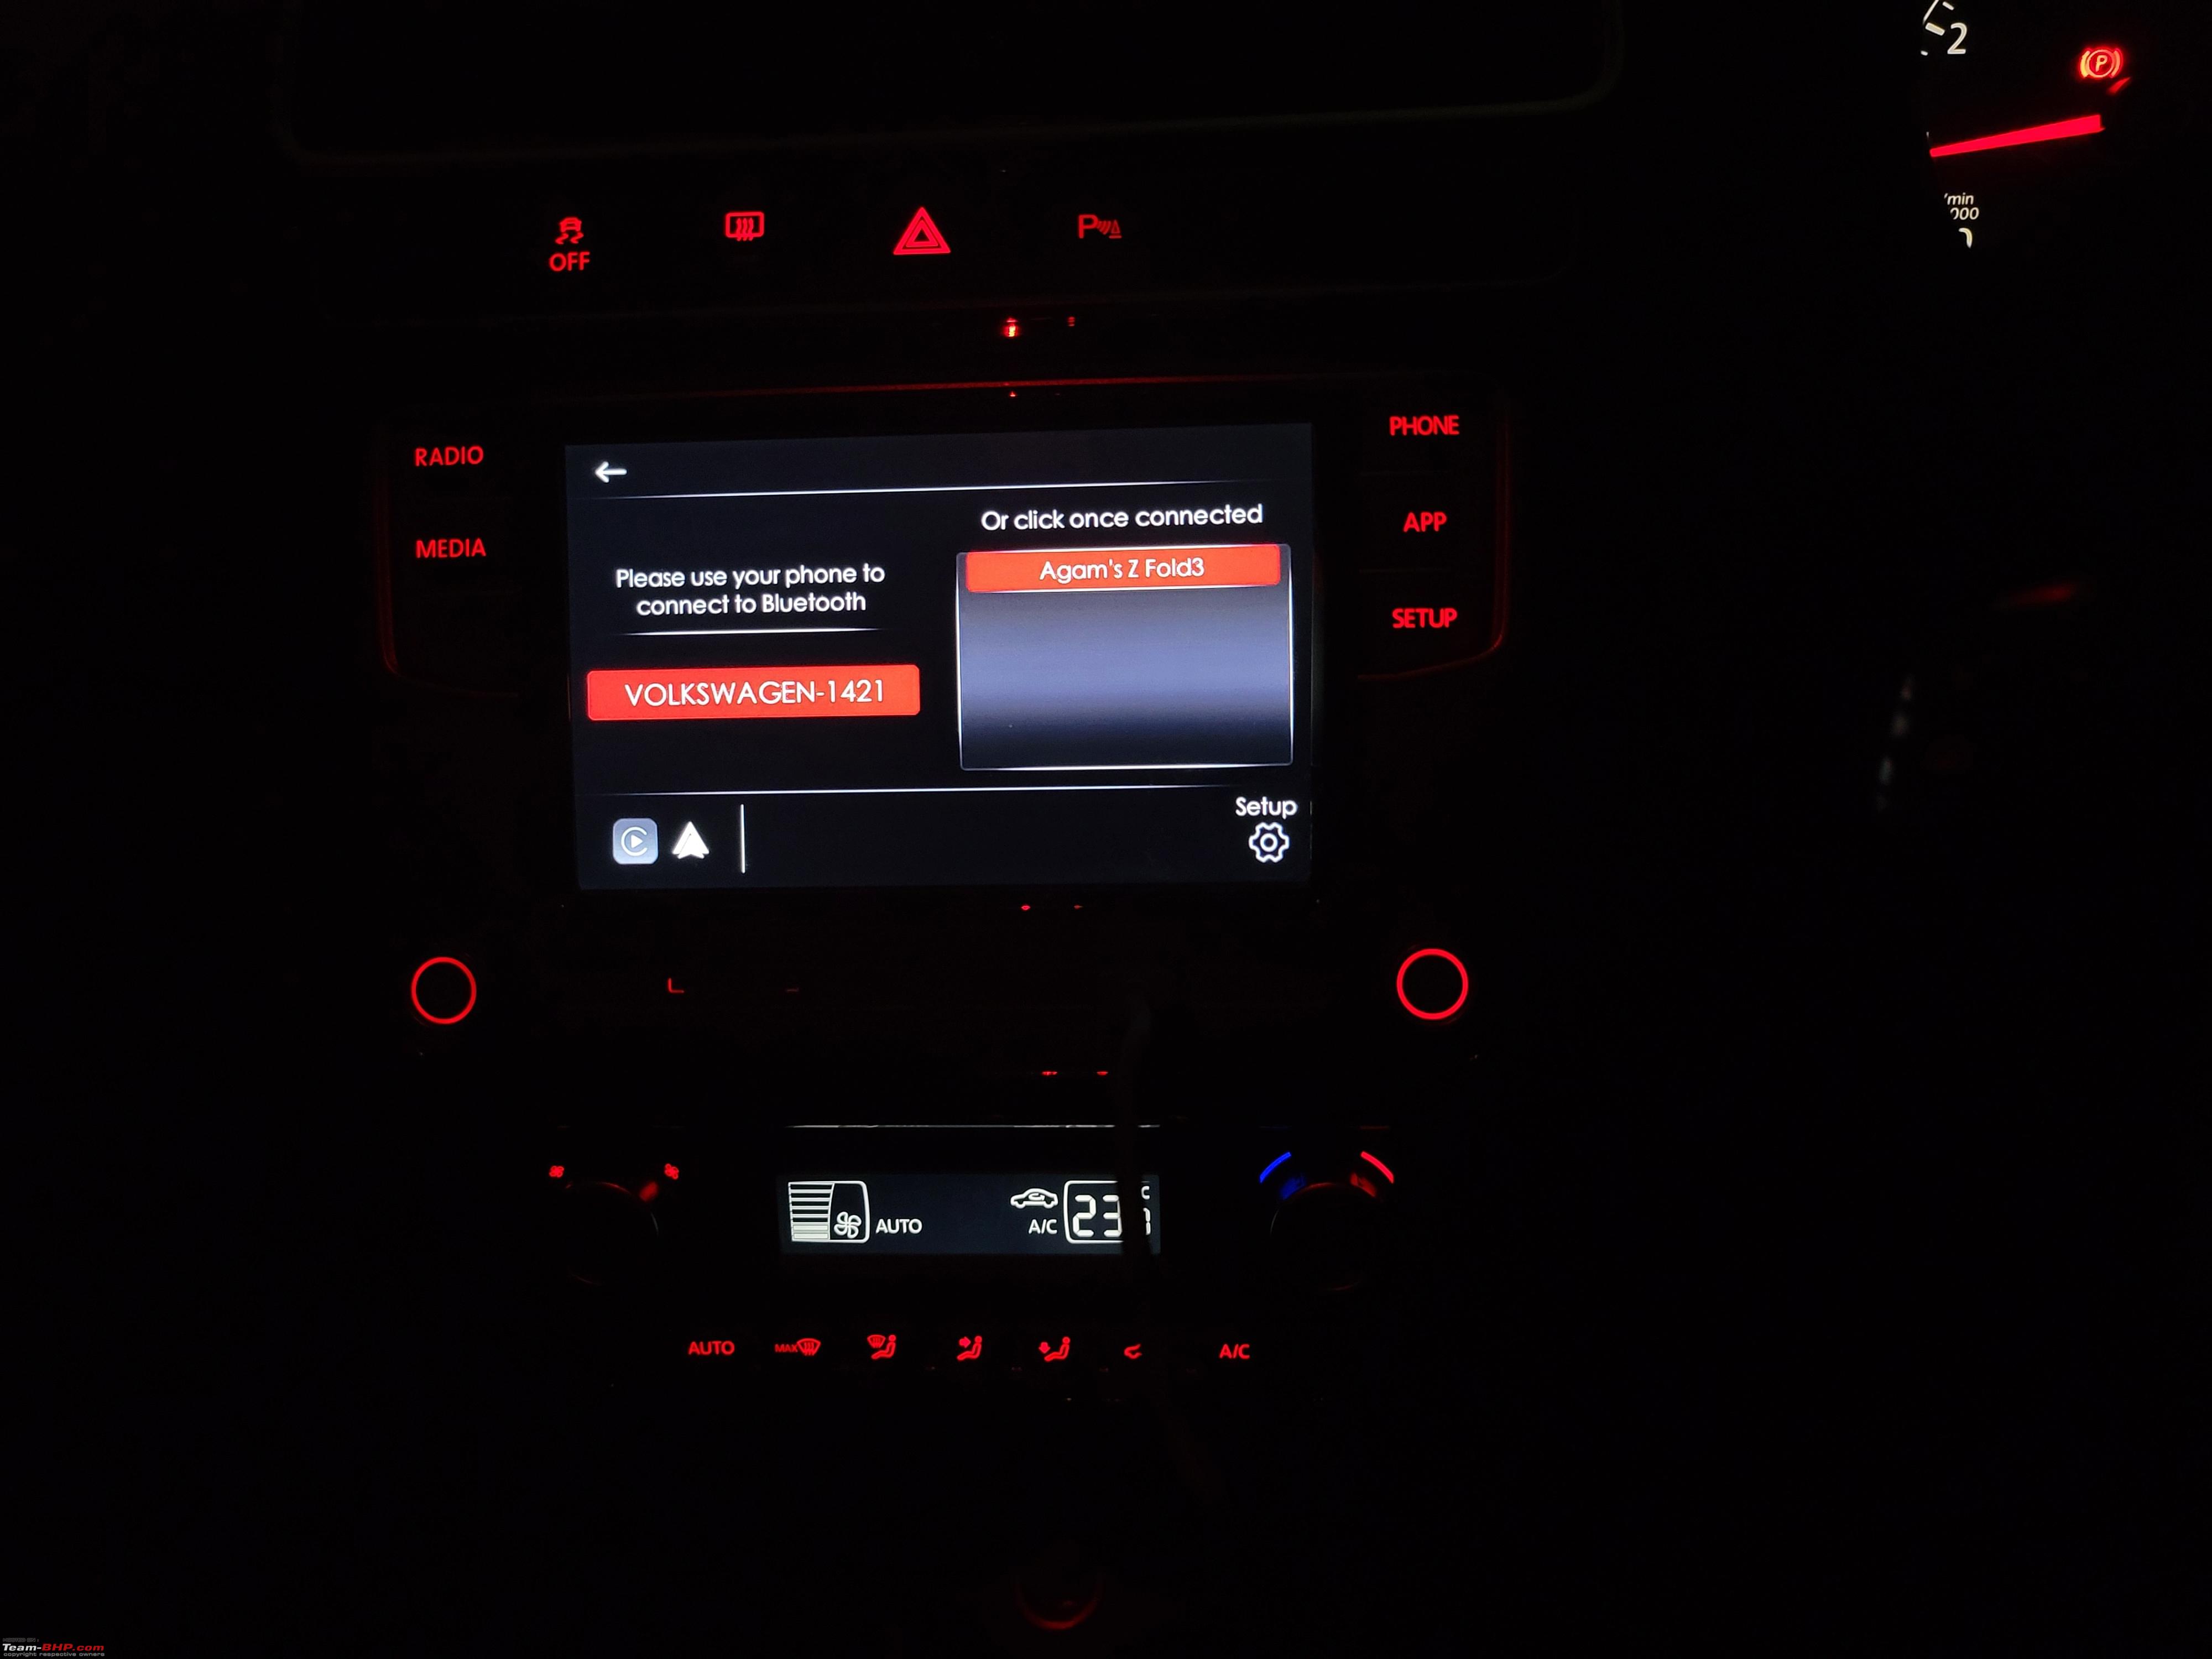 Carlinkit 4.0  Wireless Carplay & Android Auto from the same adapter -  Team-BHP